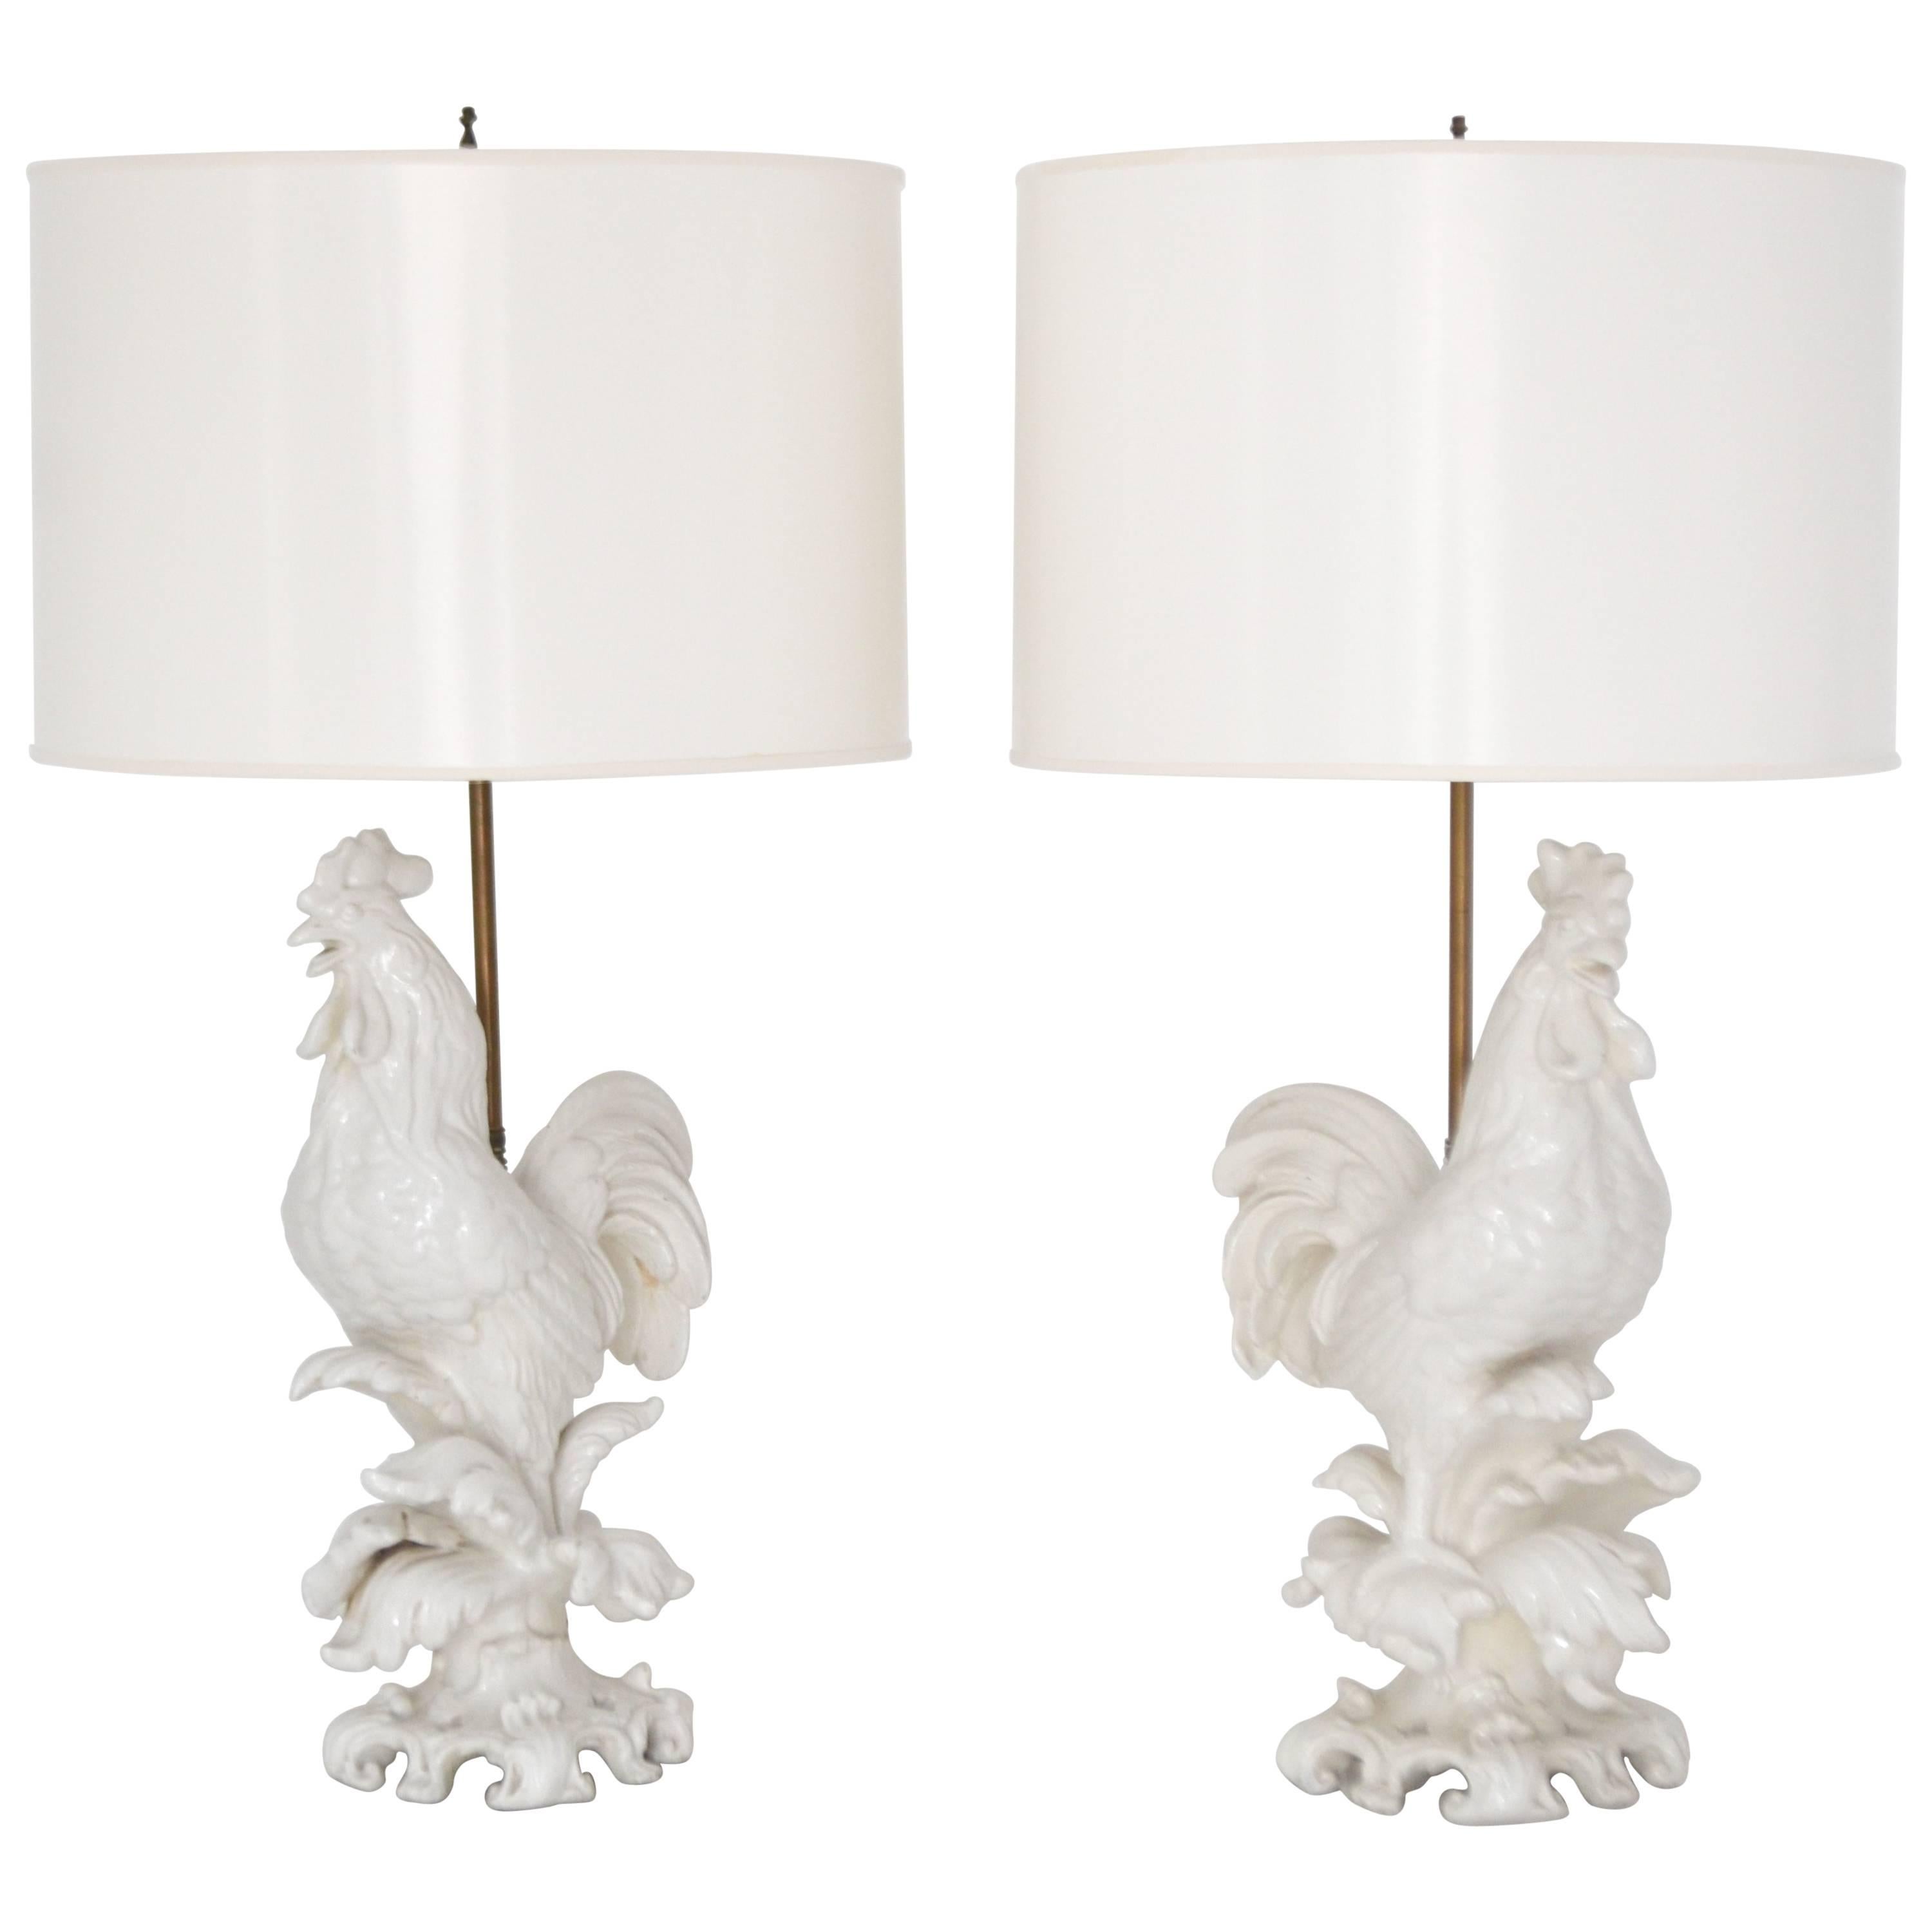 Pair of Midcentury Blanc de Chine Ceramic Rooster Form Table Lamps For Sale